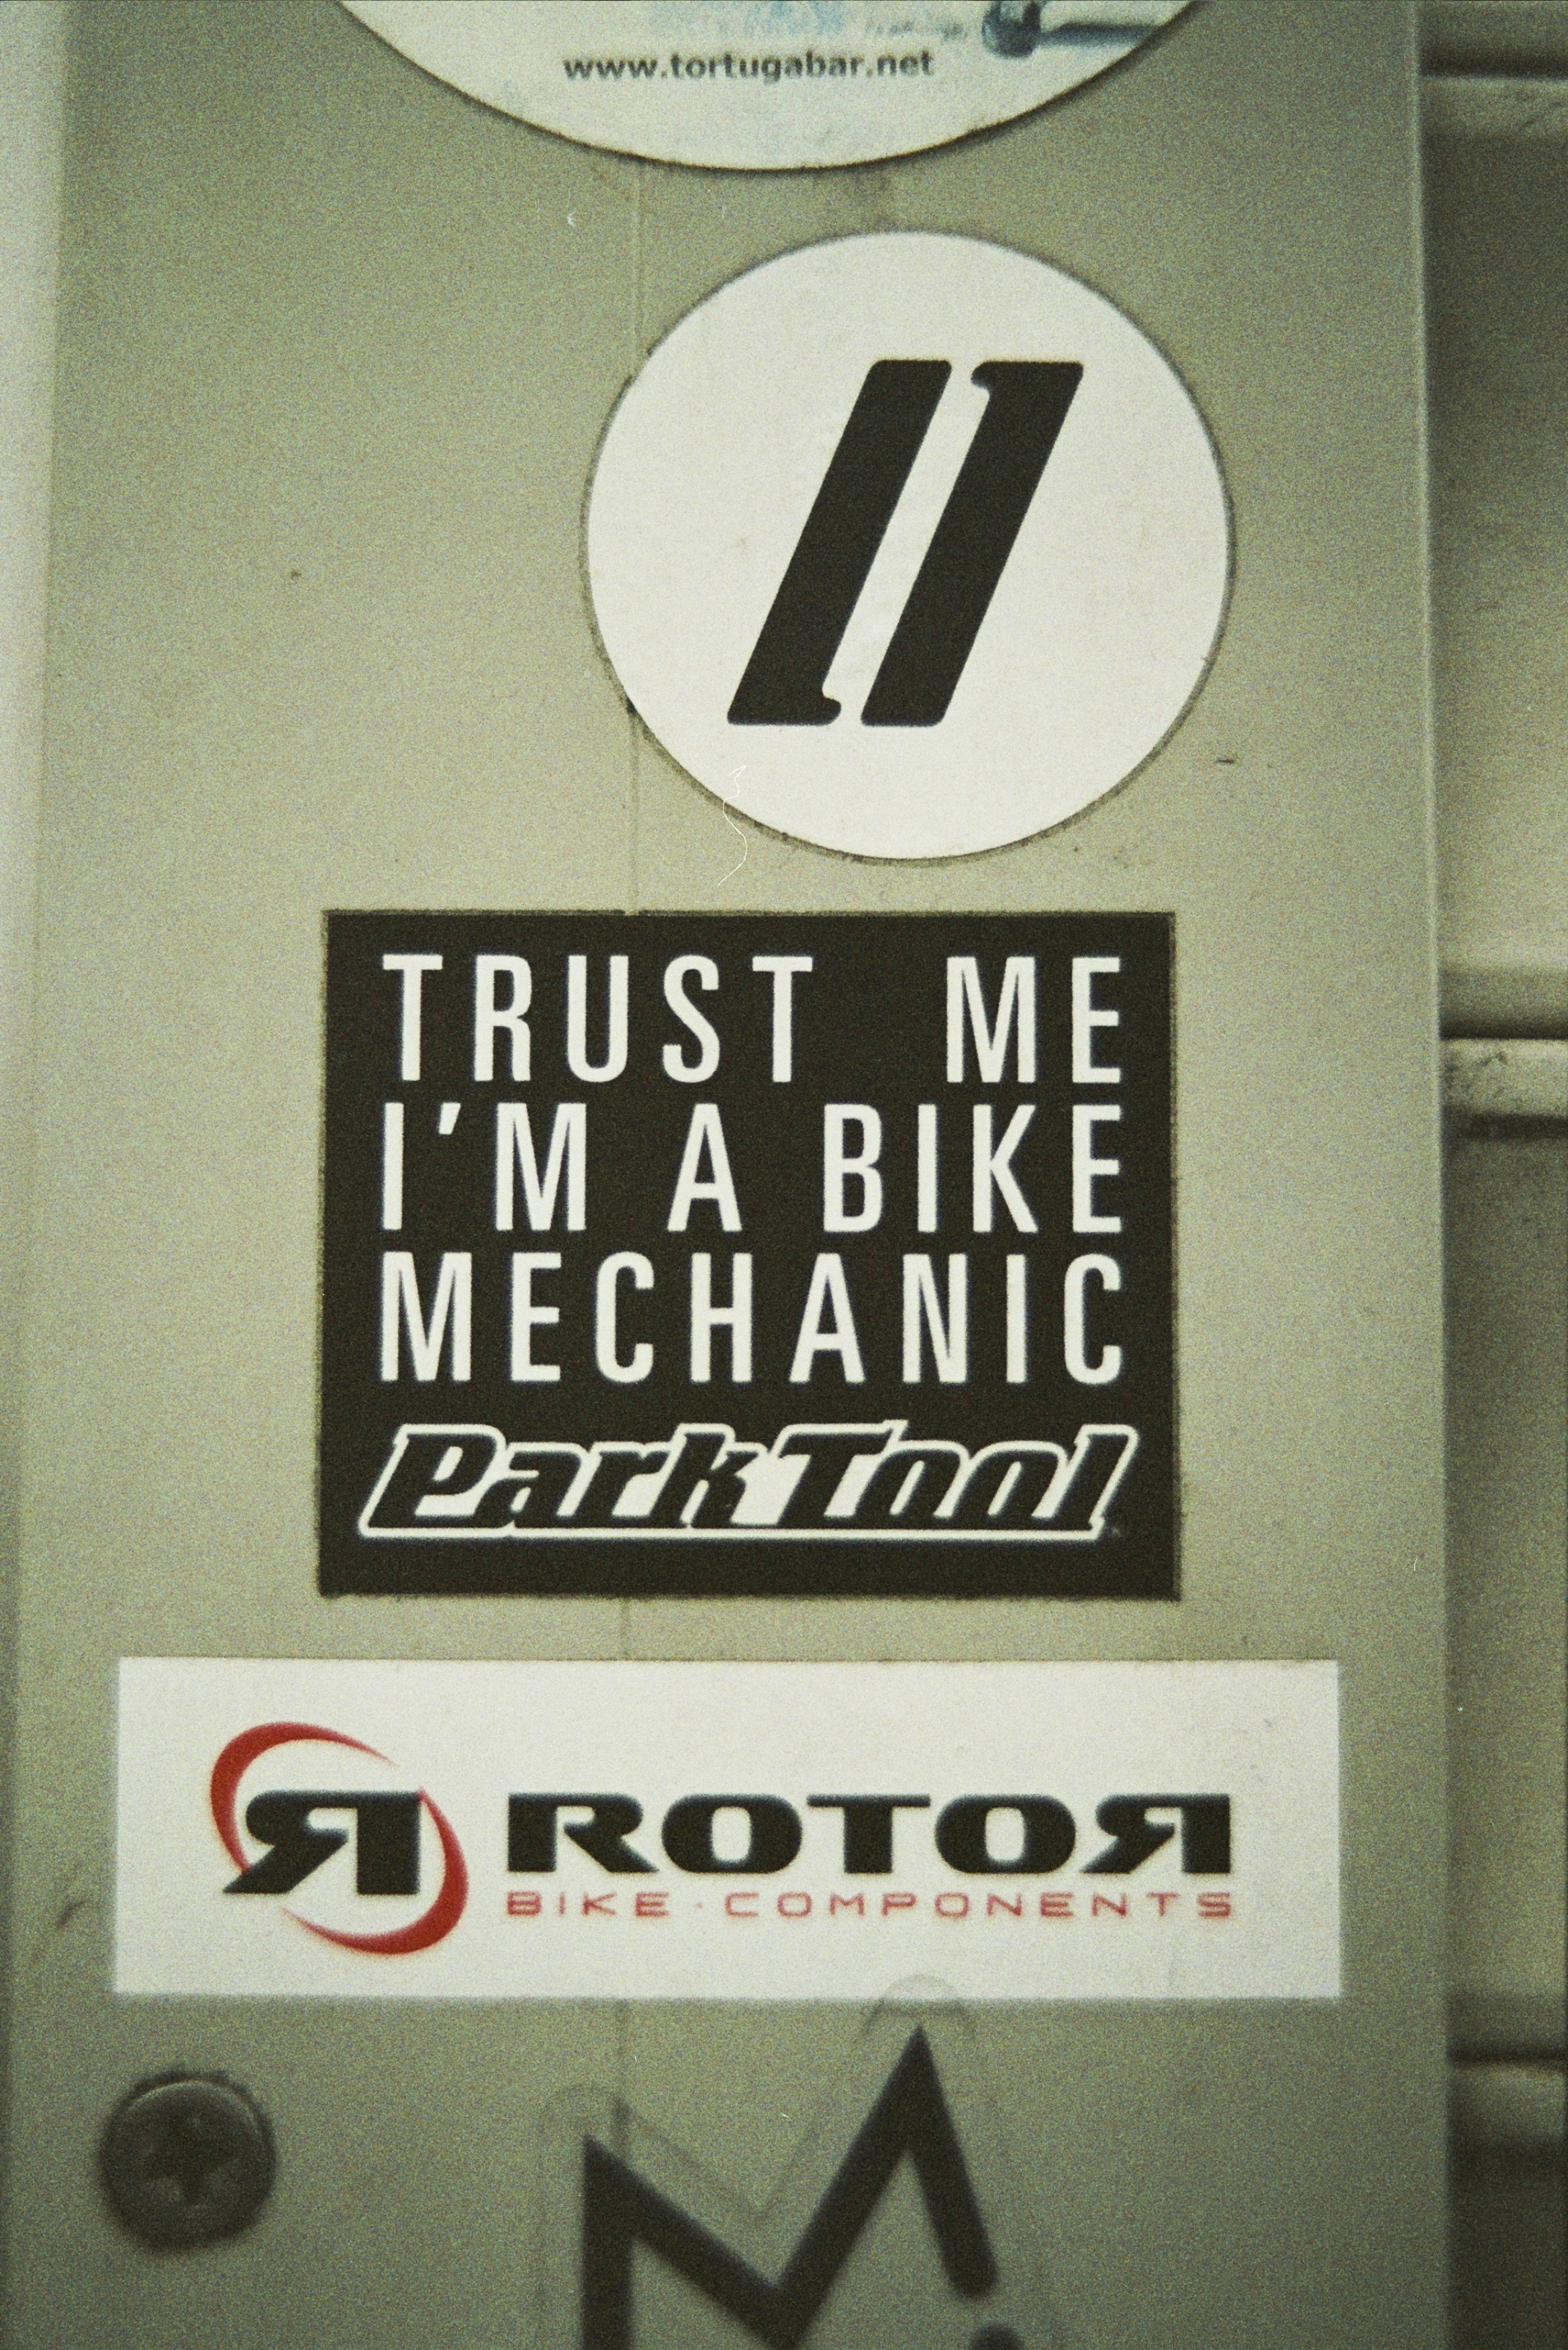 TRUST ME I'M A BIKE MECHANIC. Made with Leica R7 (Year: 1994) and Leica Summicron-R 2.0 35mm (Year: 1978). Analog scan via Foto Brinke Forchheim: Fuji Frontier SP-3000. Film reel: Agfa XRG 200 (expired 2002)